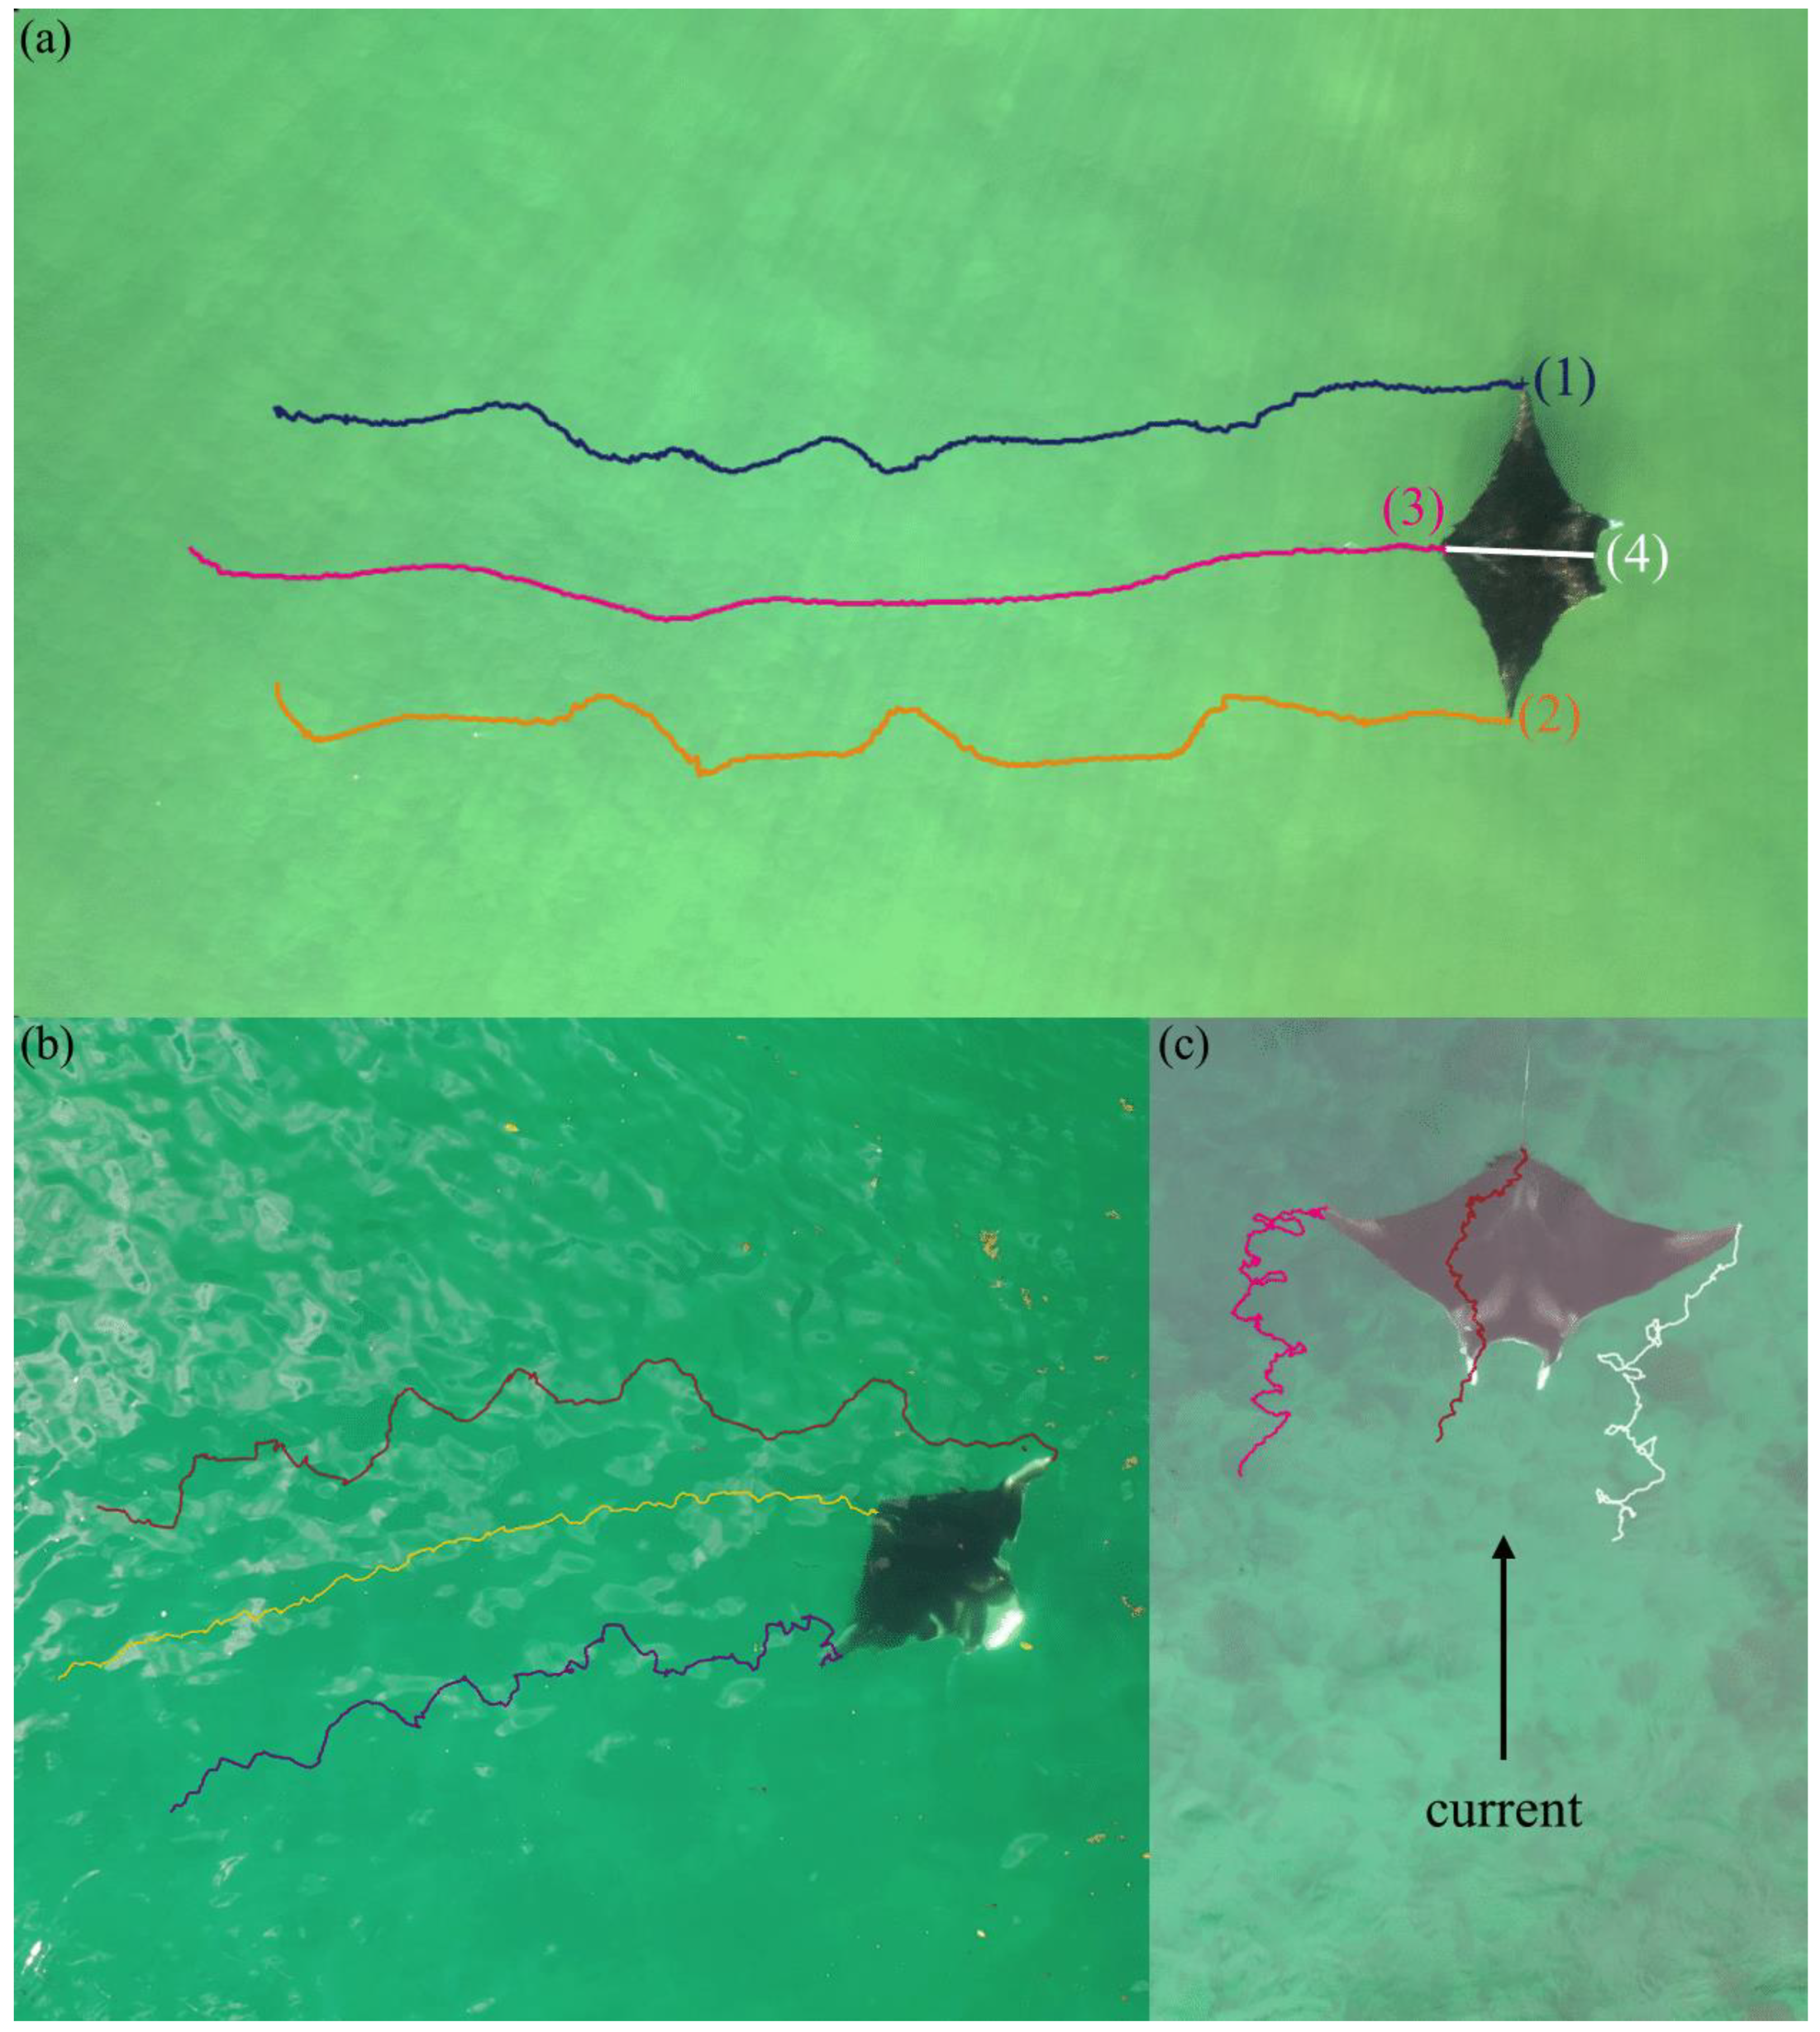 Drones | Free Full-Text | Using Drones to Assess Volitional Swimming  Kinematics of Manta Ray Behaviors in the Wild | HTML